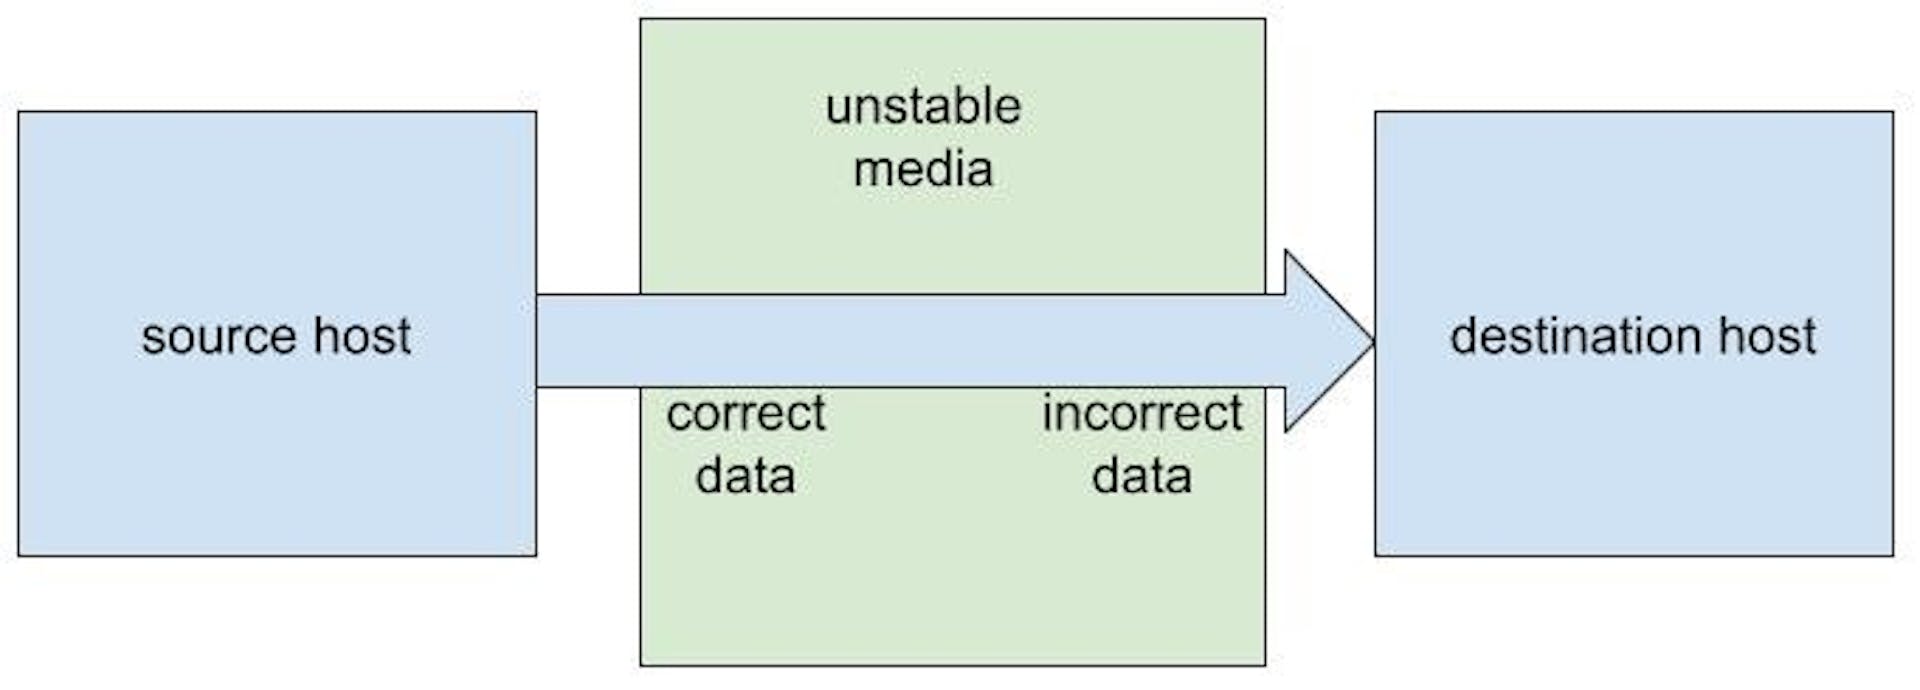 unstable media related UDP losses